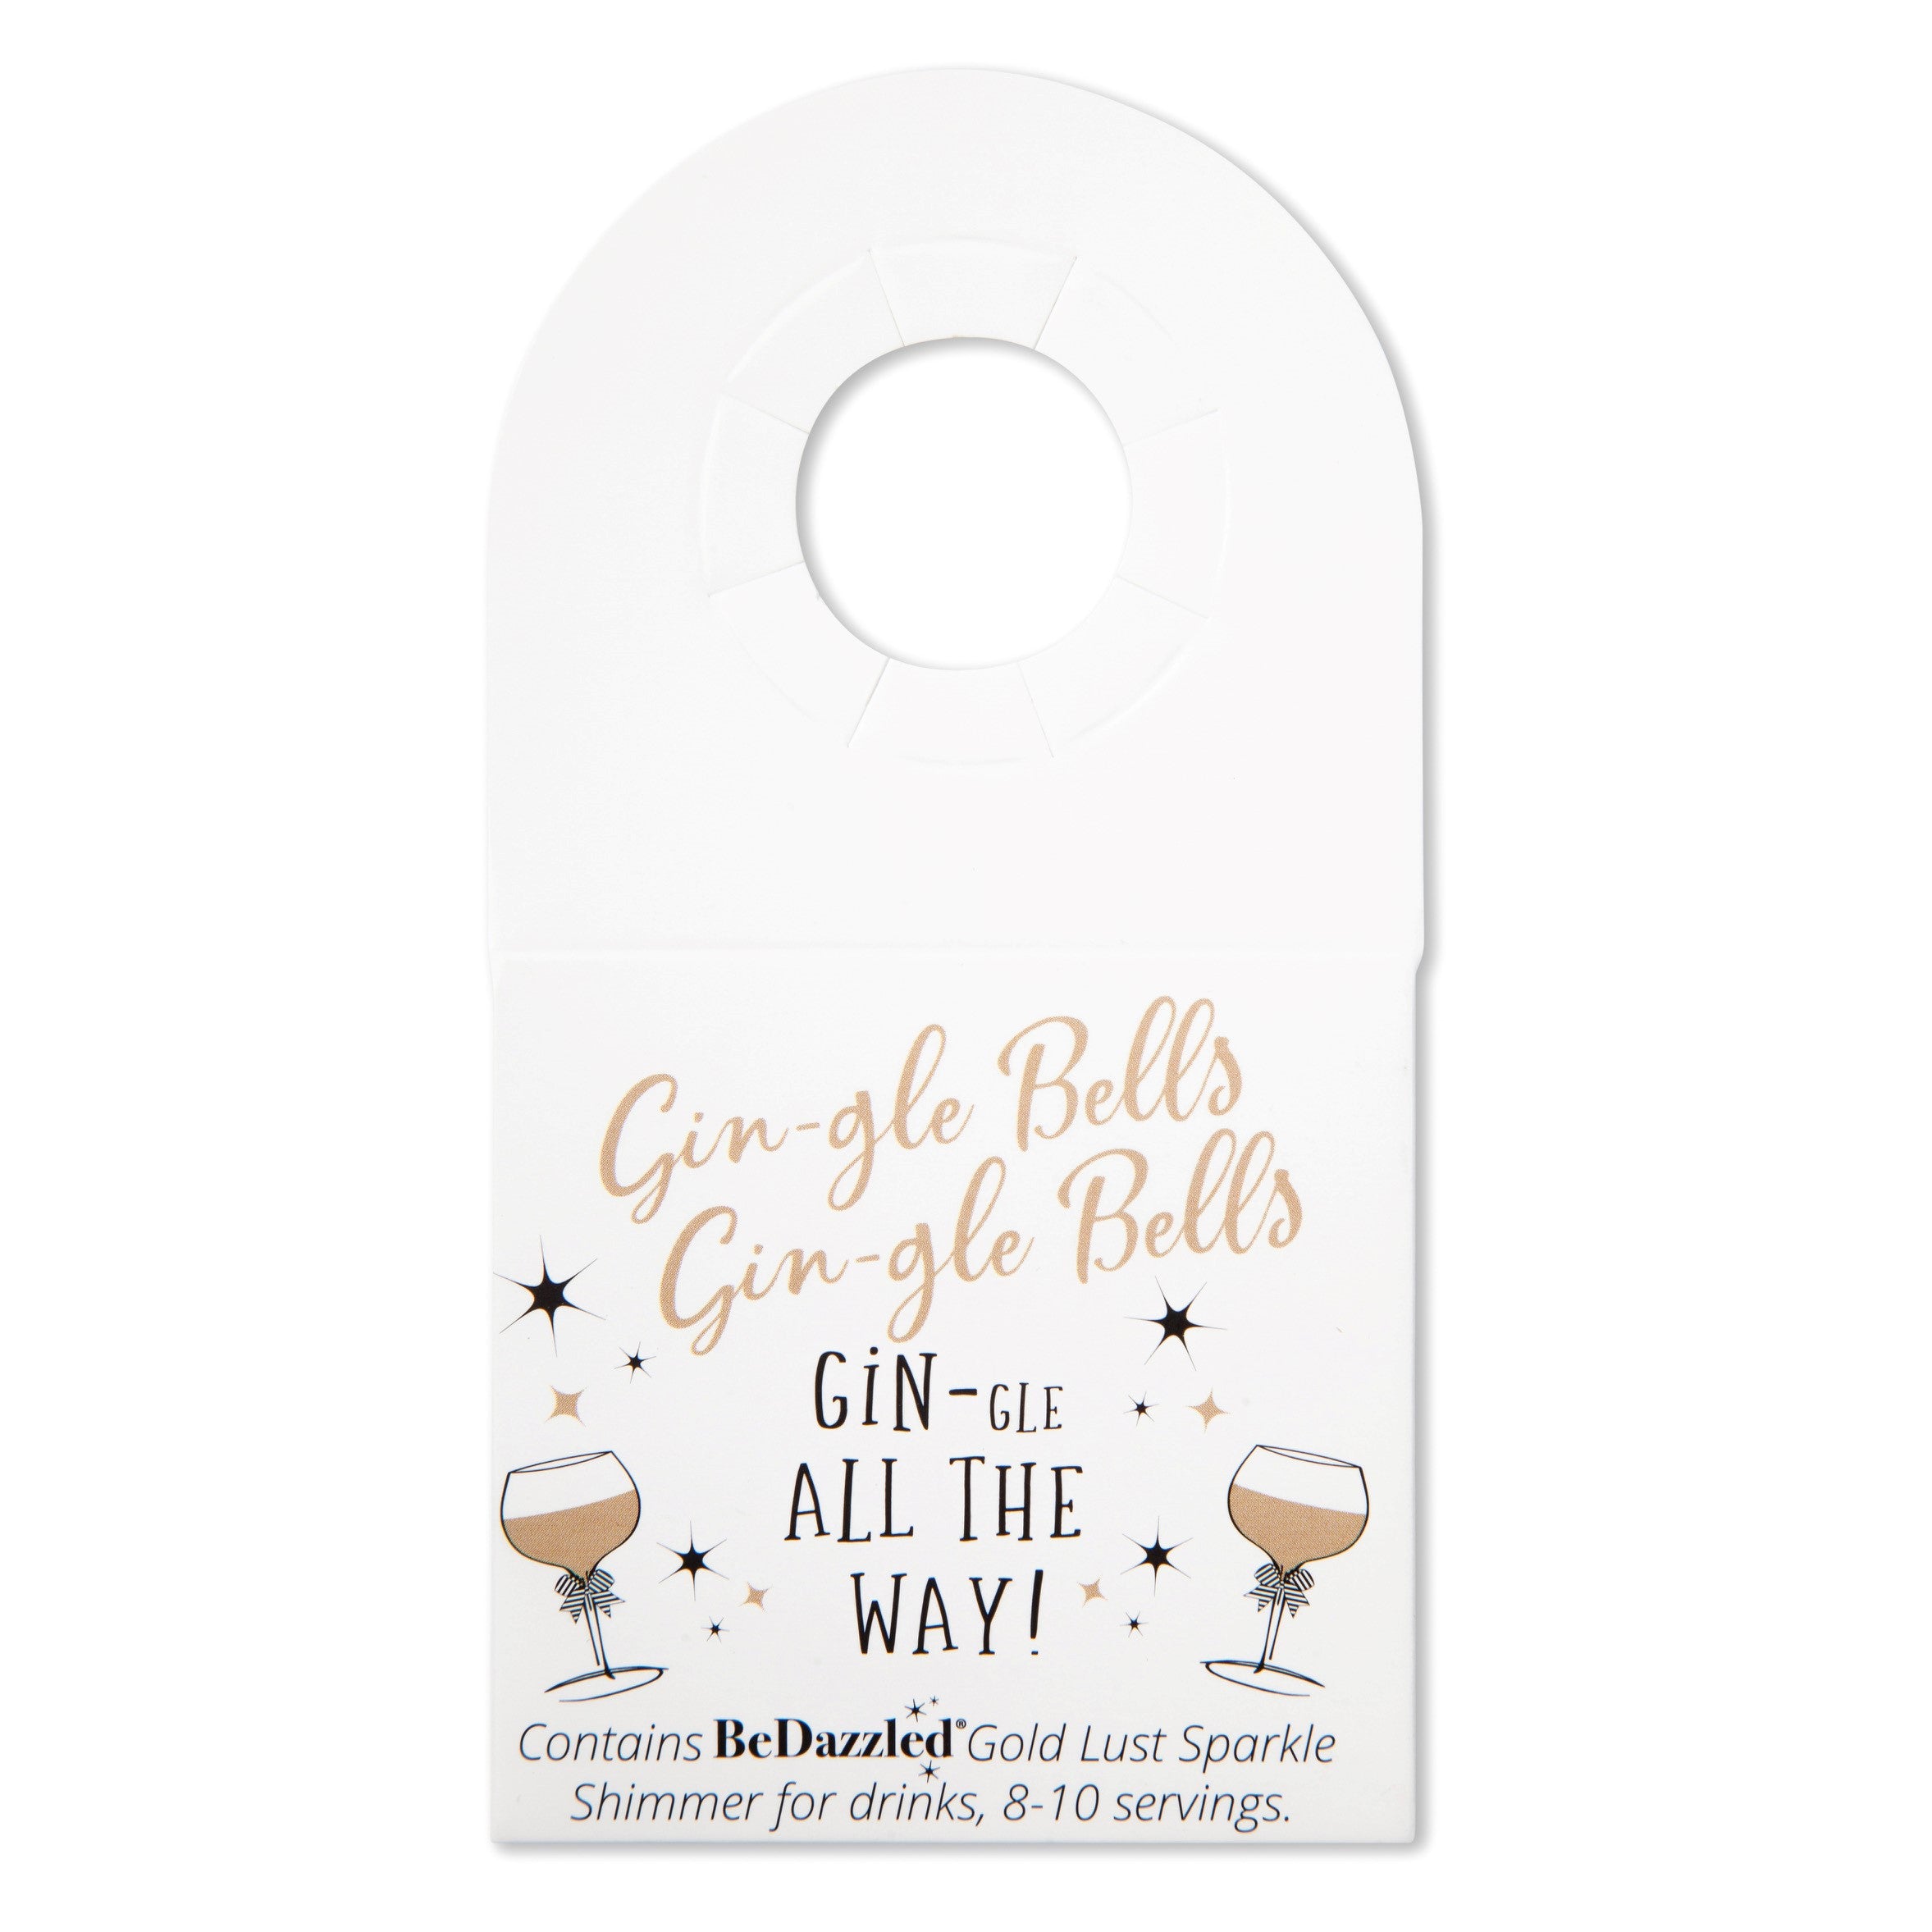 Gingle Bells, Gingle Bells, Gingle all the way! Bottle neck gift tag containing GOLD drinks shimmer